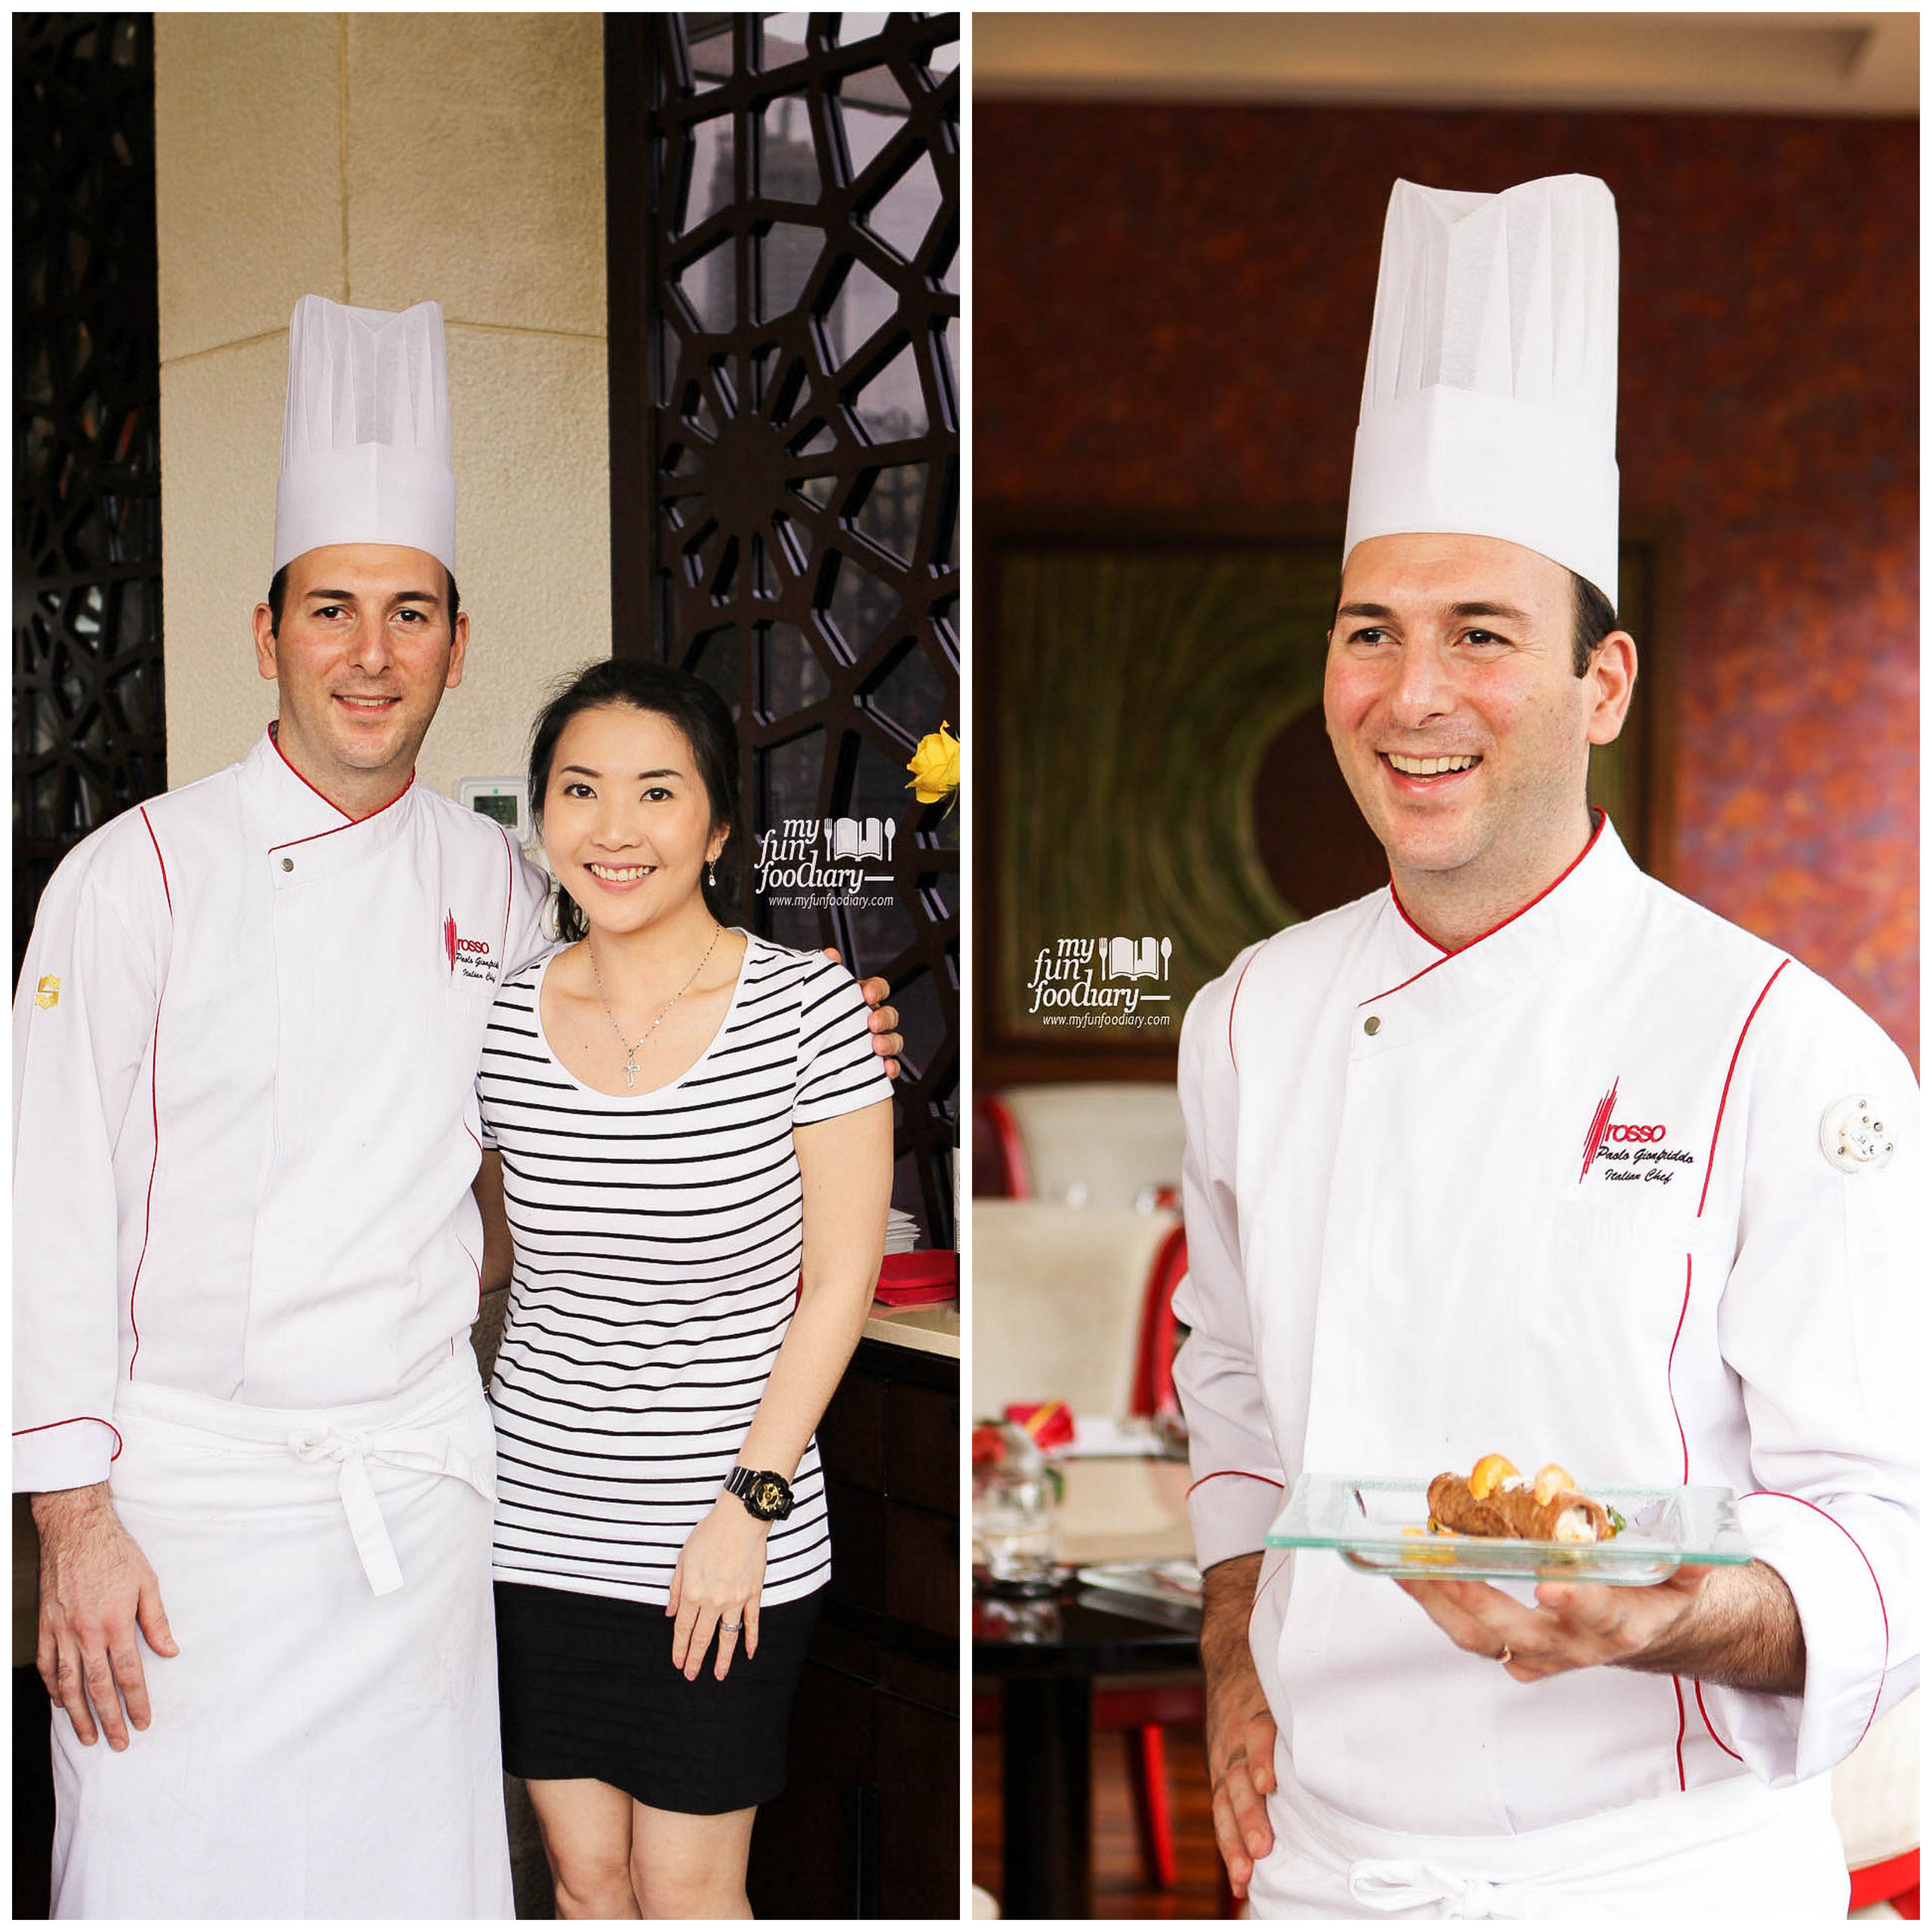 Mullie and Chef Paolo Gionfriddo at Rosso Shangri-La Jakarta by Myfunfoodiary